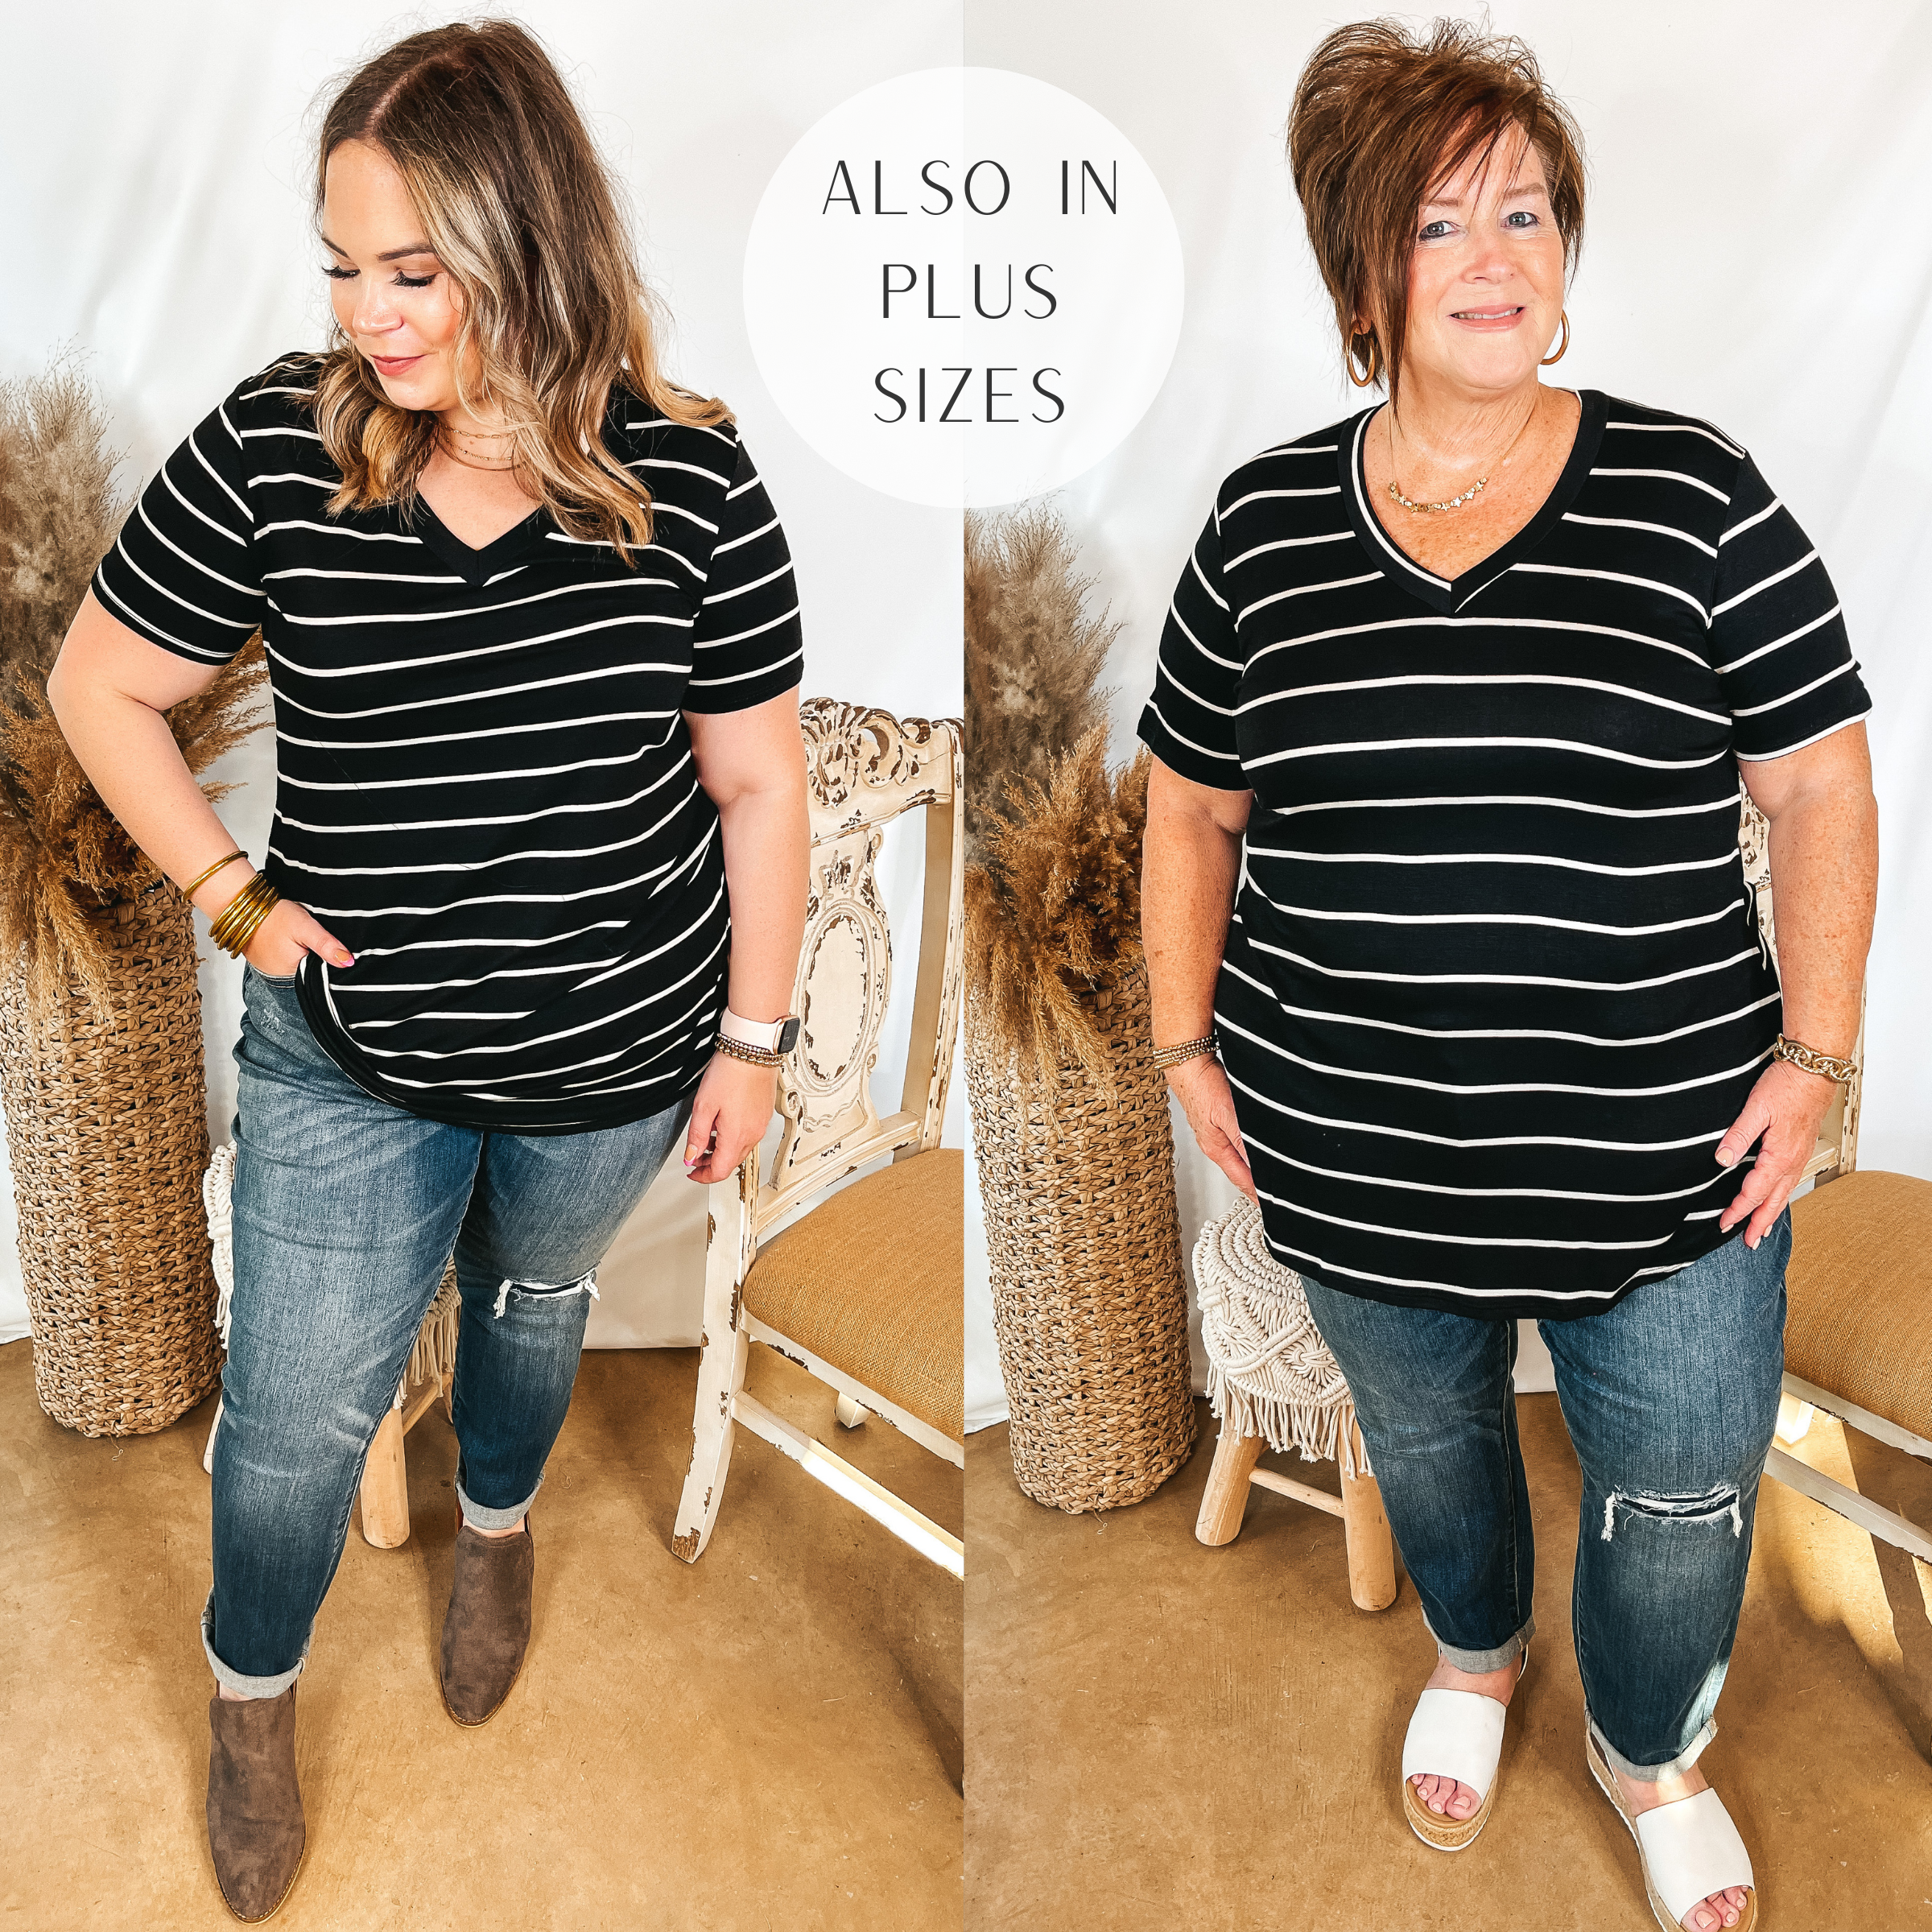 Models are wearing a black v neck top that has white stripes. Both models have it paired with patch knee boyfriend jeans. Size large model has it paired with brown booties and gold jewelry. Plus size model has it paired with white sandals and gold jewelry.